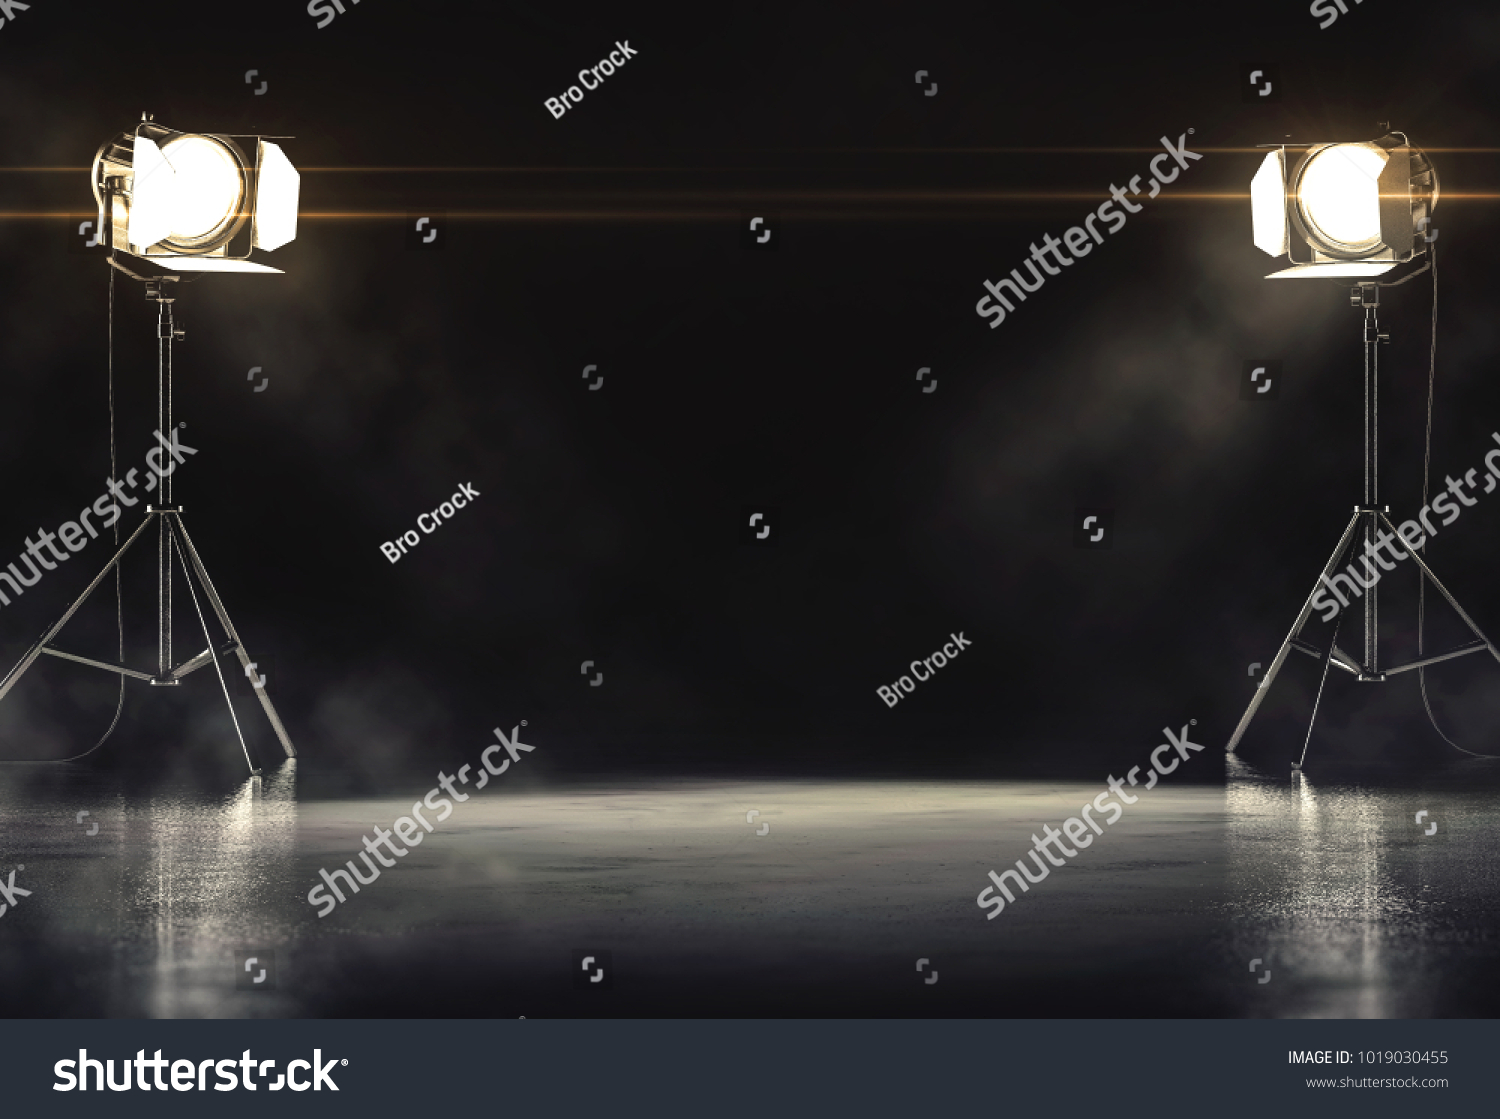 Searchlight background concept